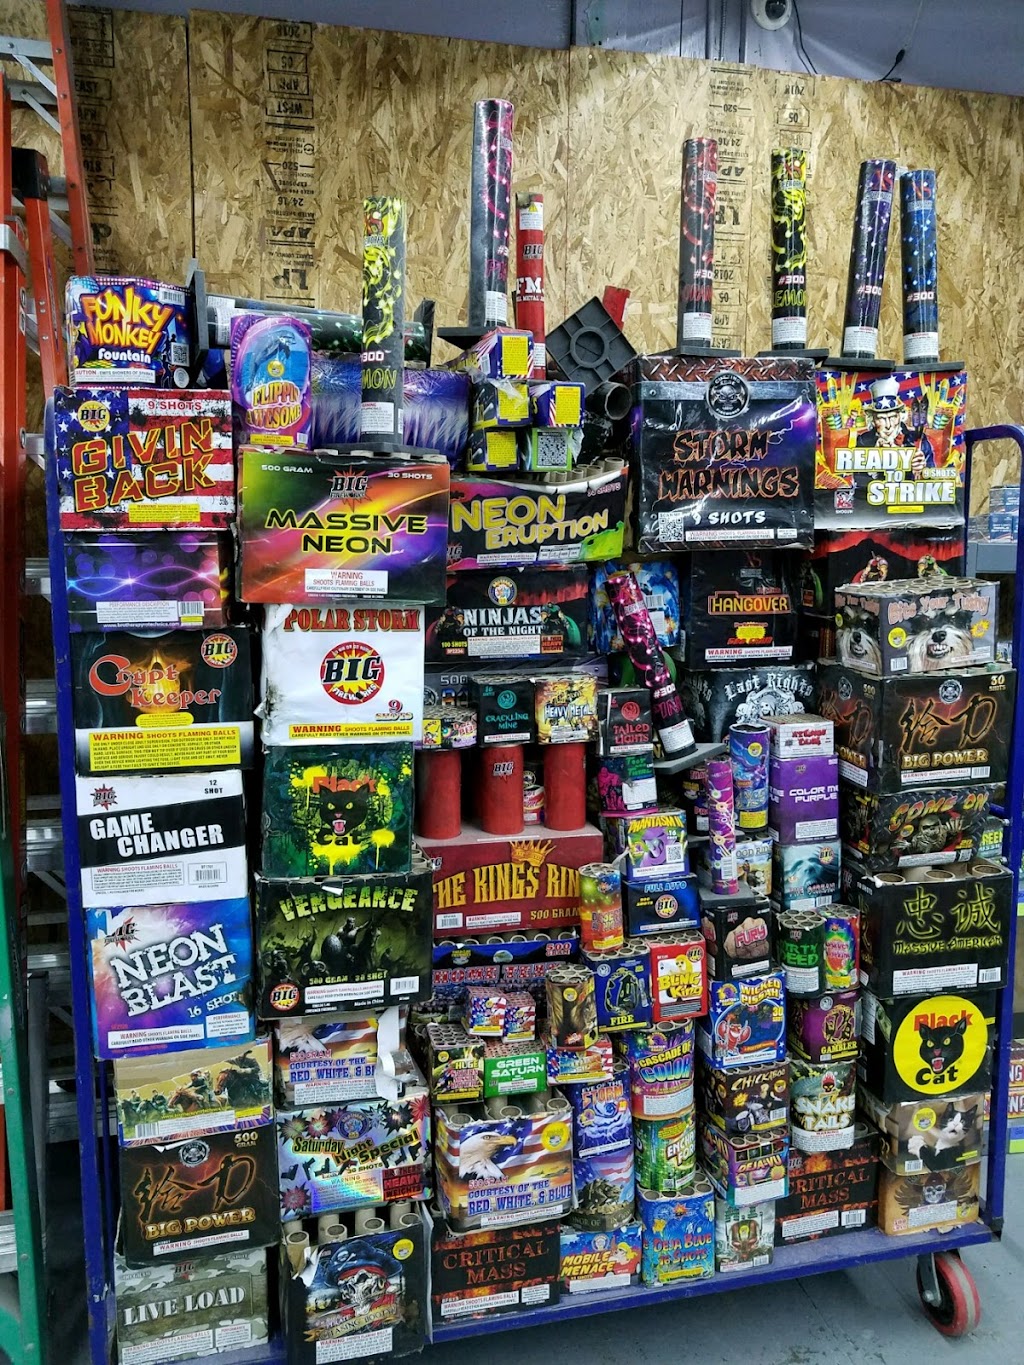 Just Add Fire Fireworks | 21502 Dixie Hwy, West Point, KY 40177, USA | Phone: (502) 378-3069